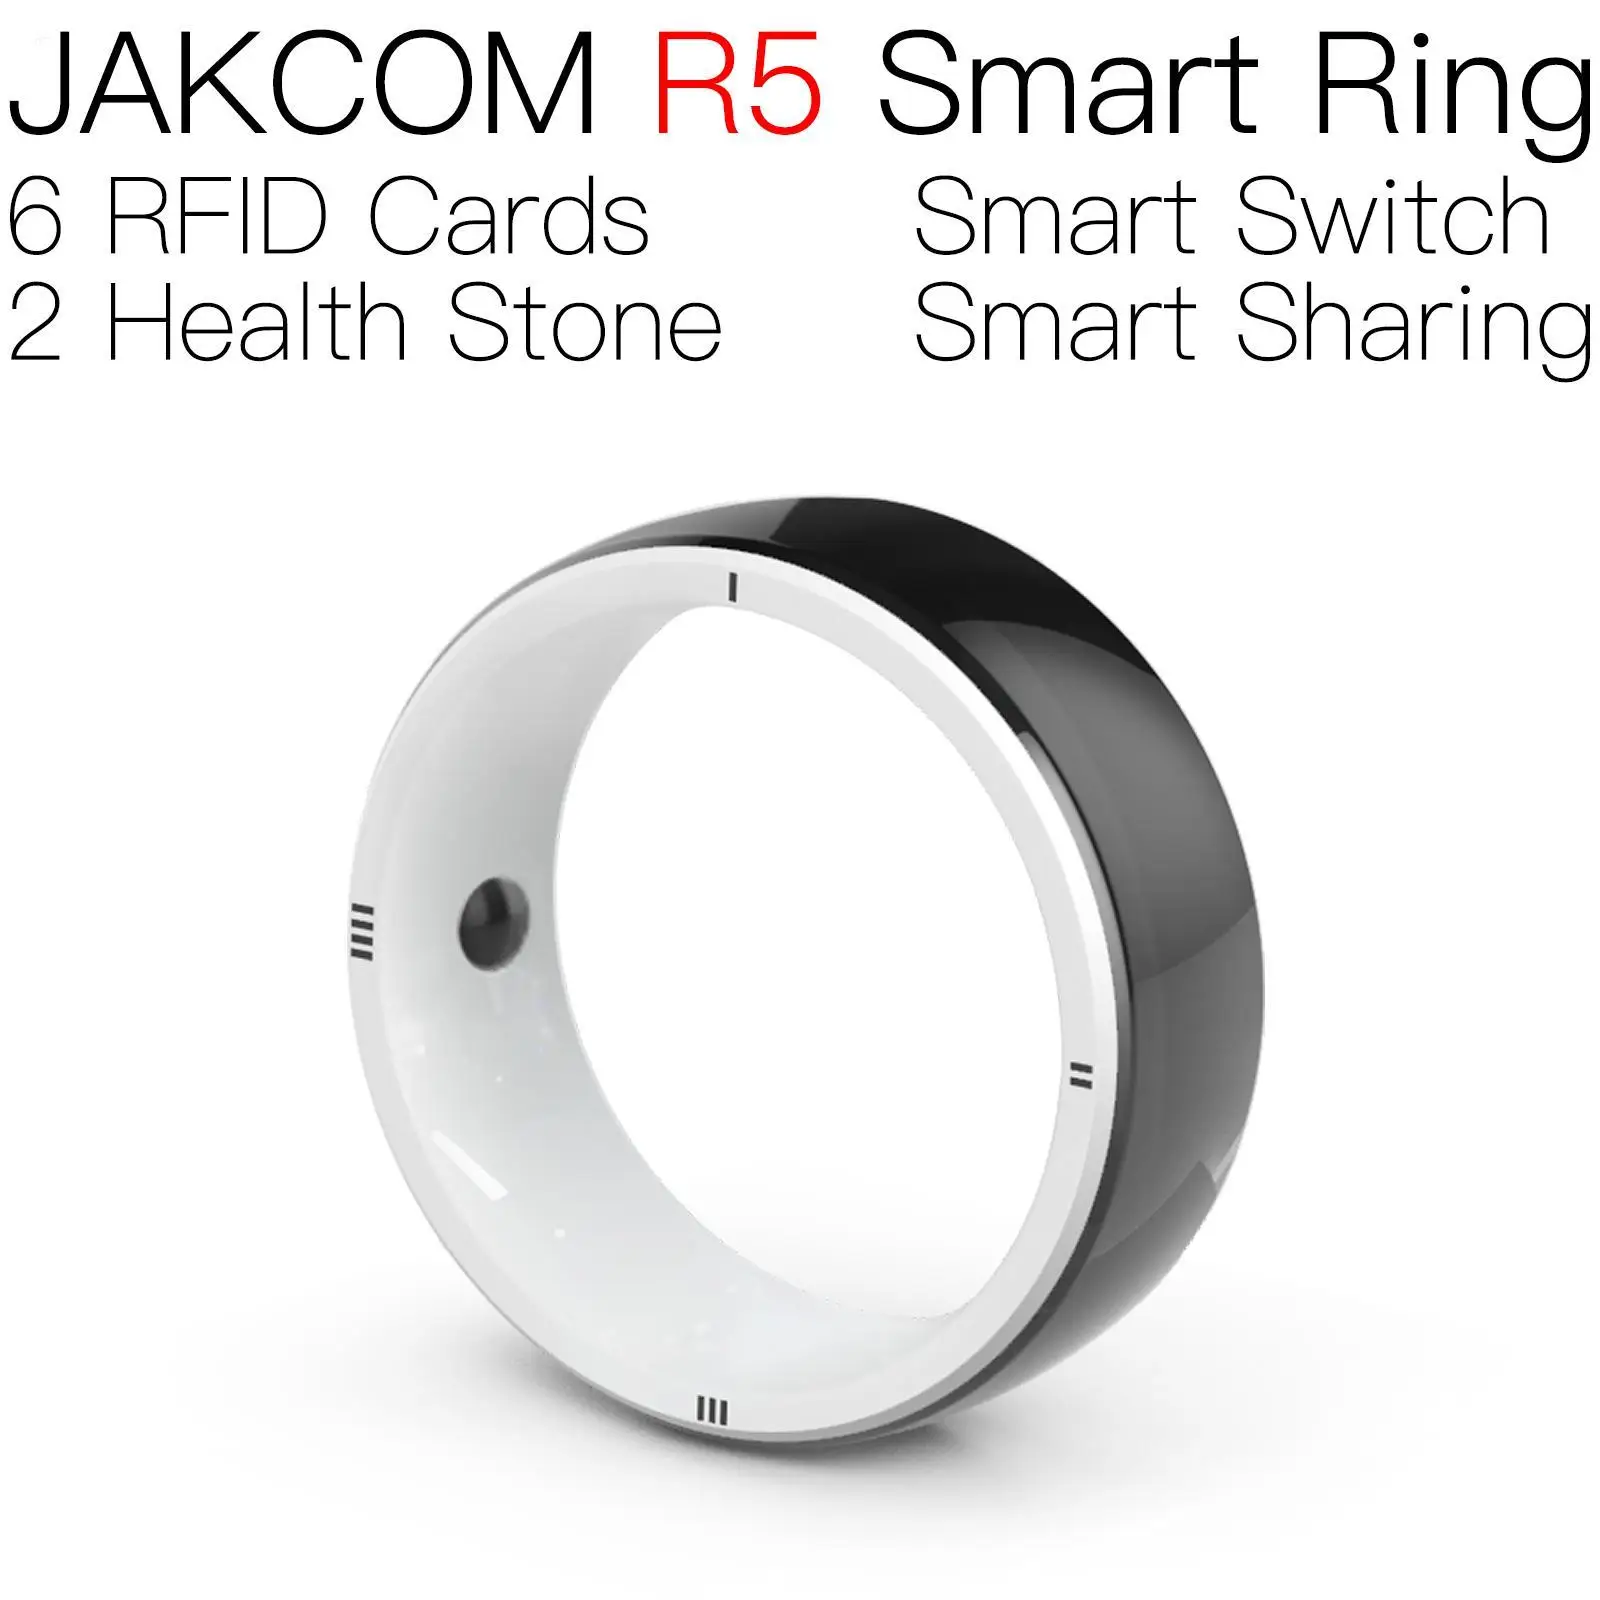 

JAKCOM R5 Smart Ring Best gift with rfid anime epc wooden nfc 125khz tk4100 em4100 chip coil chips scanner pet tag access